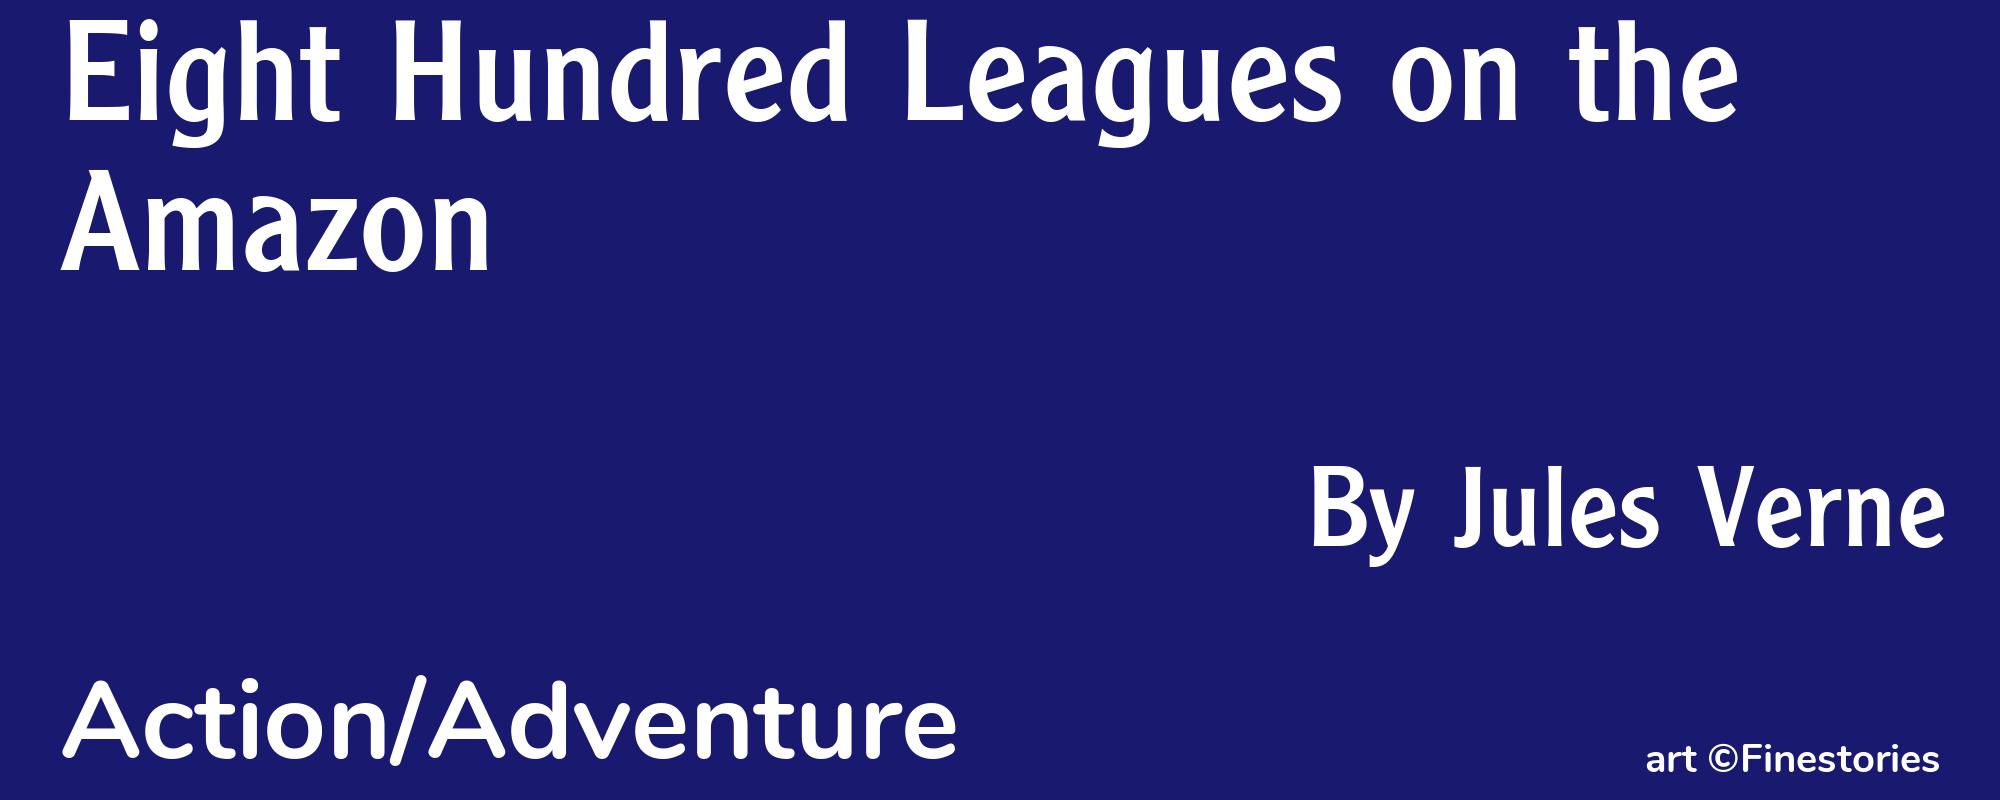 Eight Hundred Leagues on the Amazon - Cover